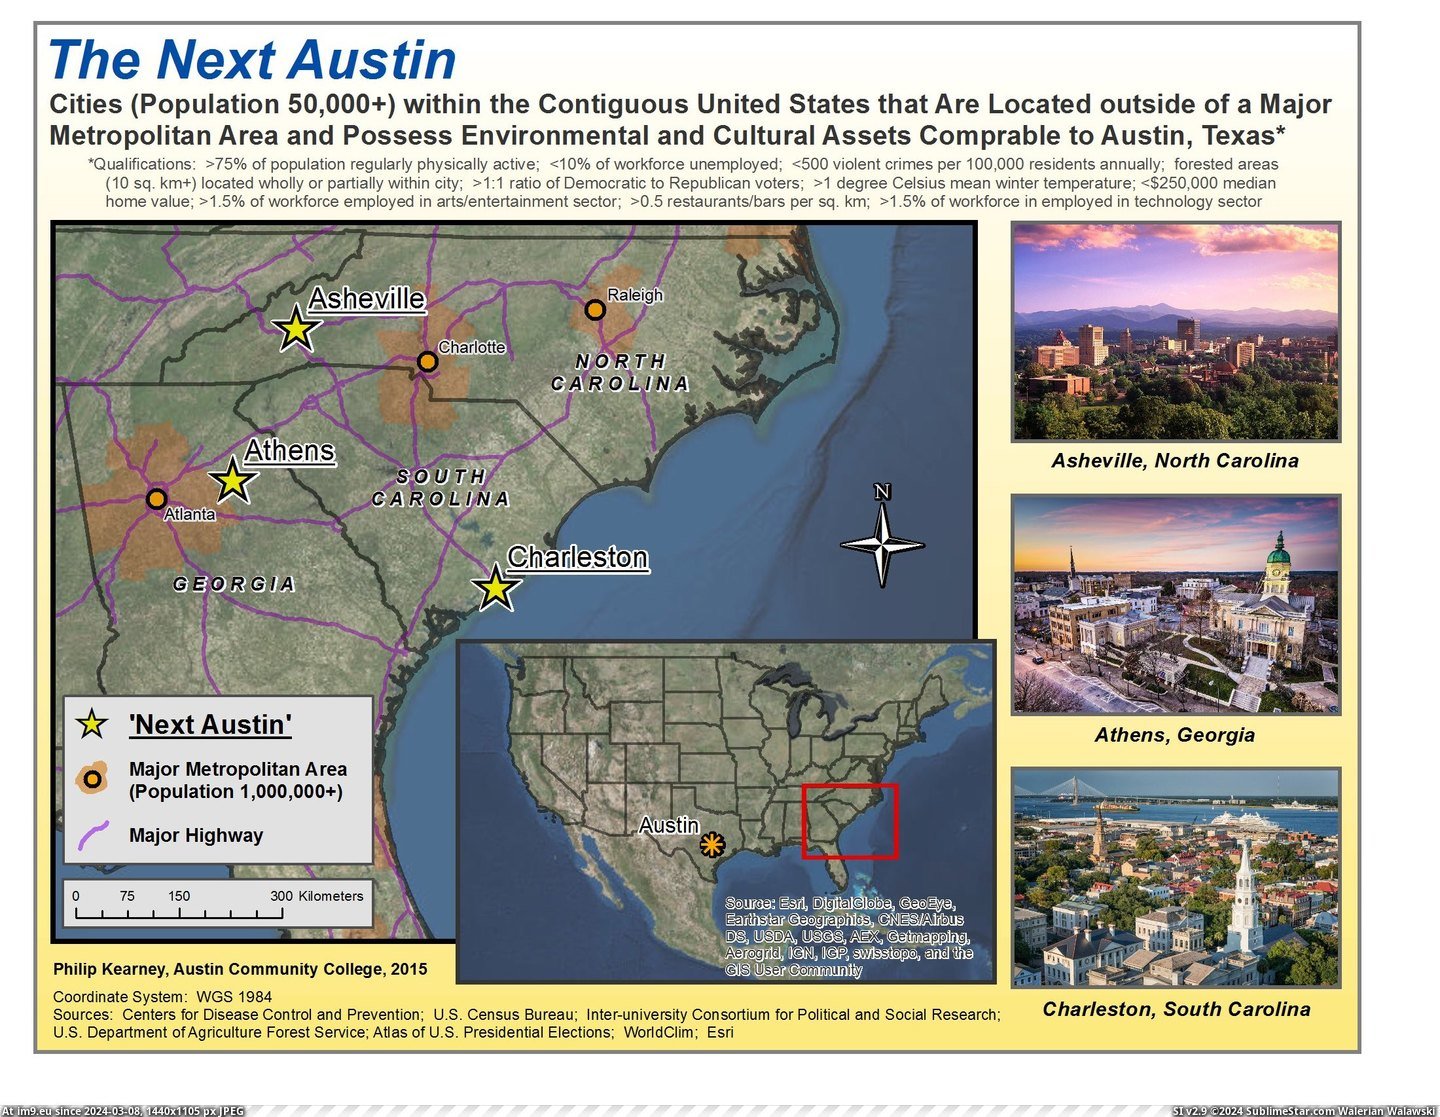 #Share #Thought #Project #Austin #Geography #Class #Final [Mapporn] Thought I'd share my final project for my geography (GIS) class with y'all: 'The Next Austin'  [2200x1700] Pic. (Изображение из альбом My r/MAPS favs))